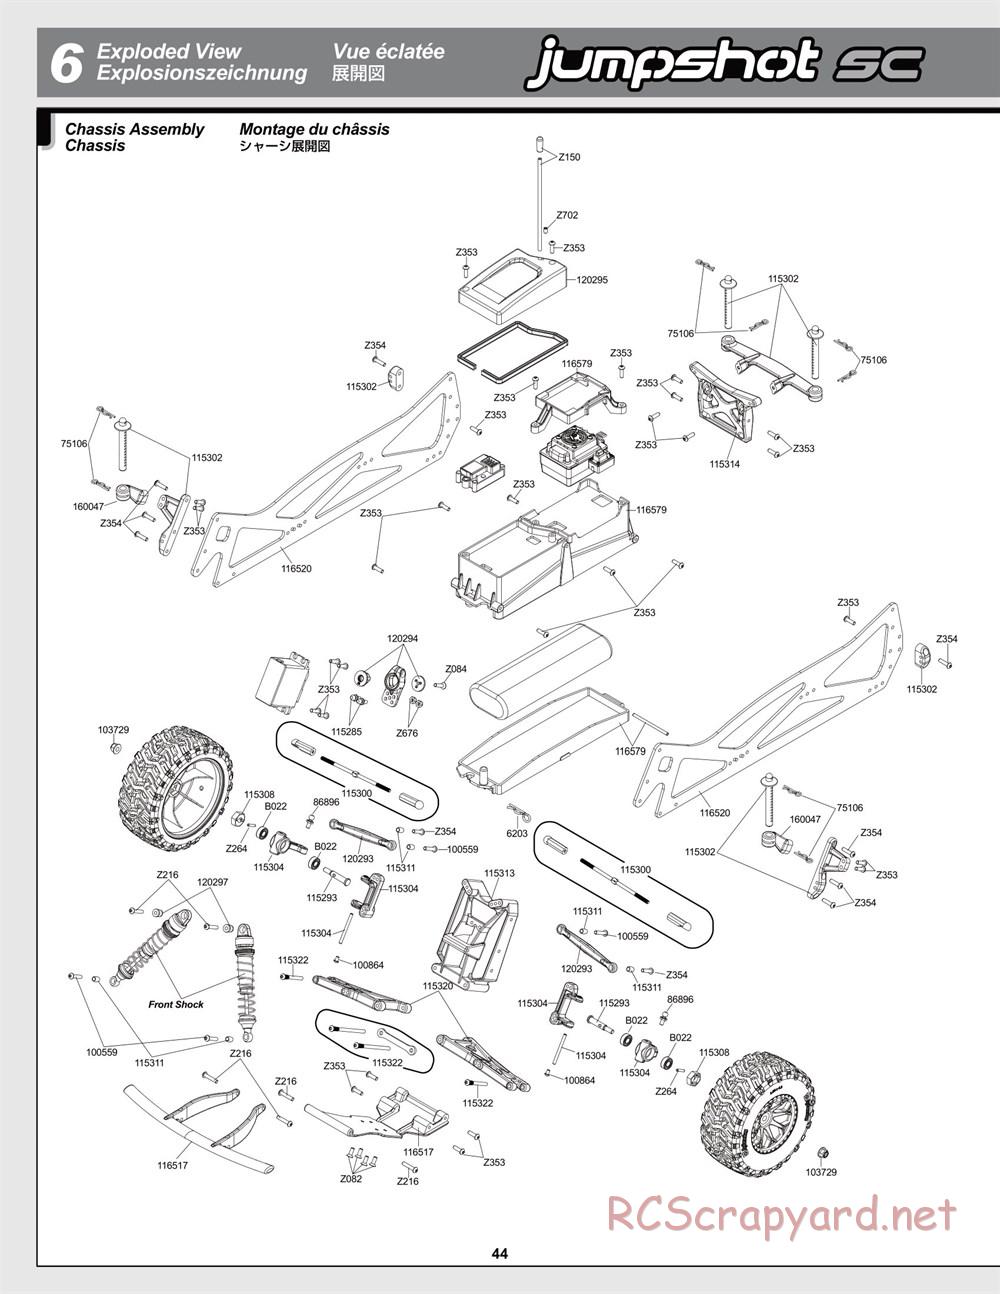 HPI - Jumpshot MT Flux - Exploded View - Page 44